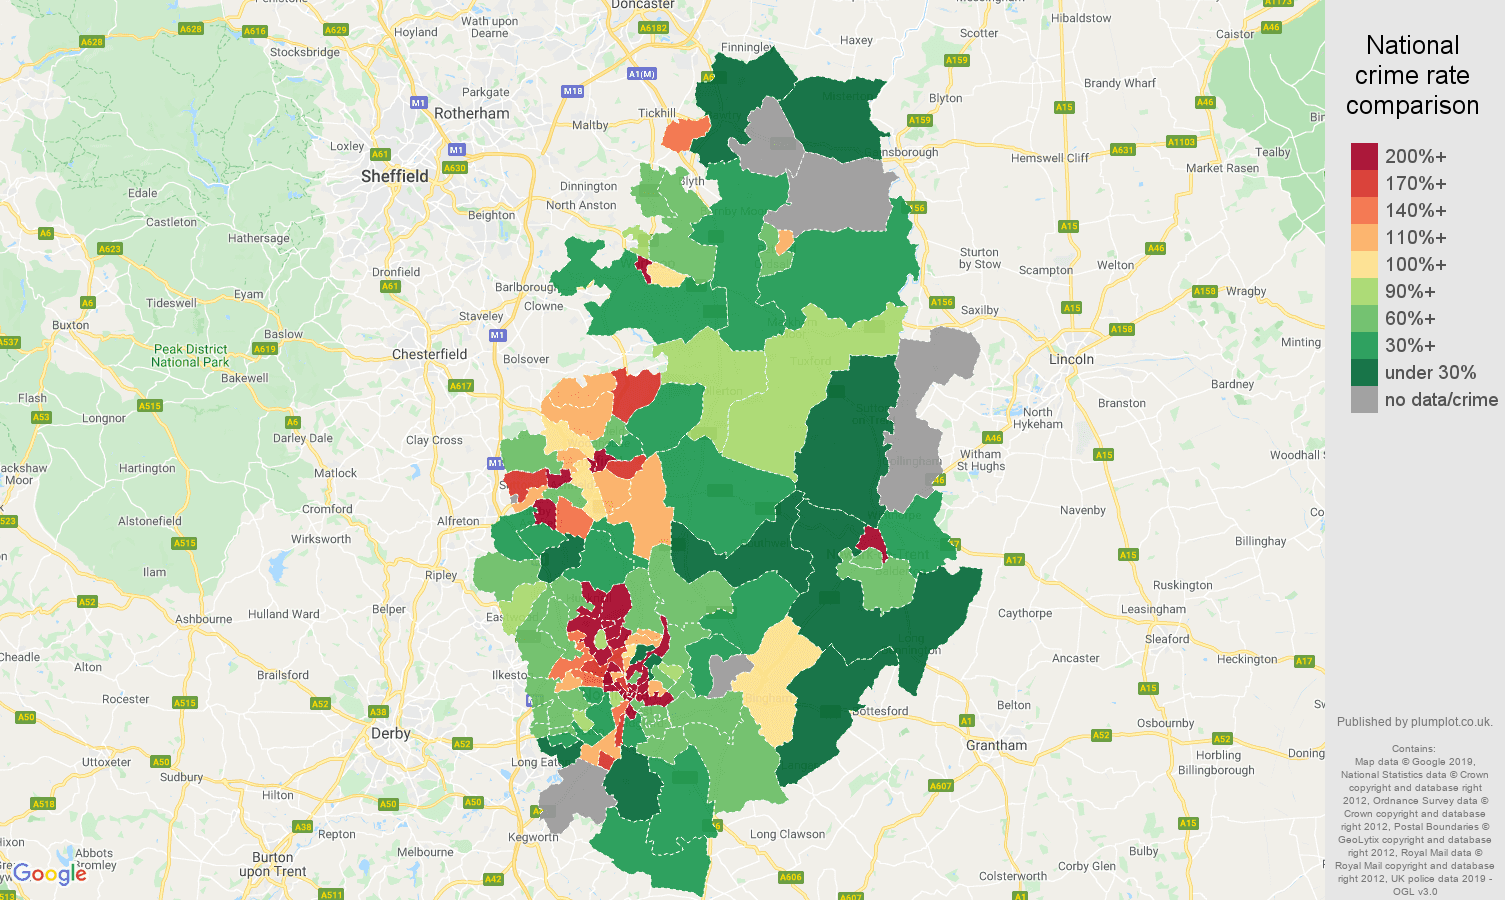 Nottinghamshire possession of weapons crime rate comparison map